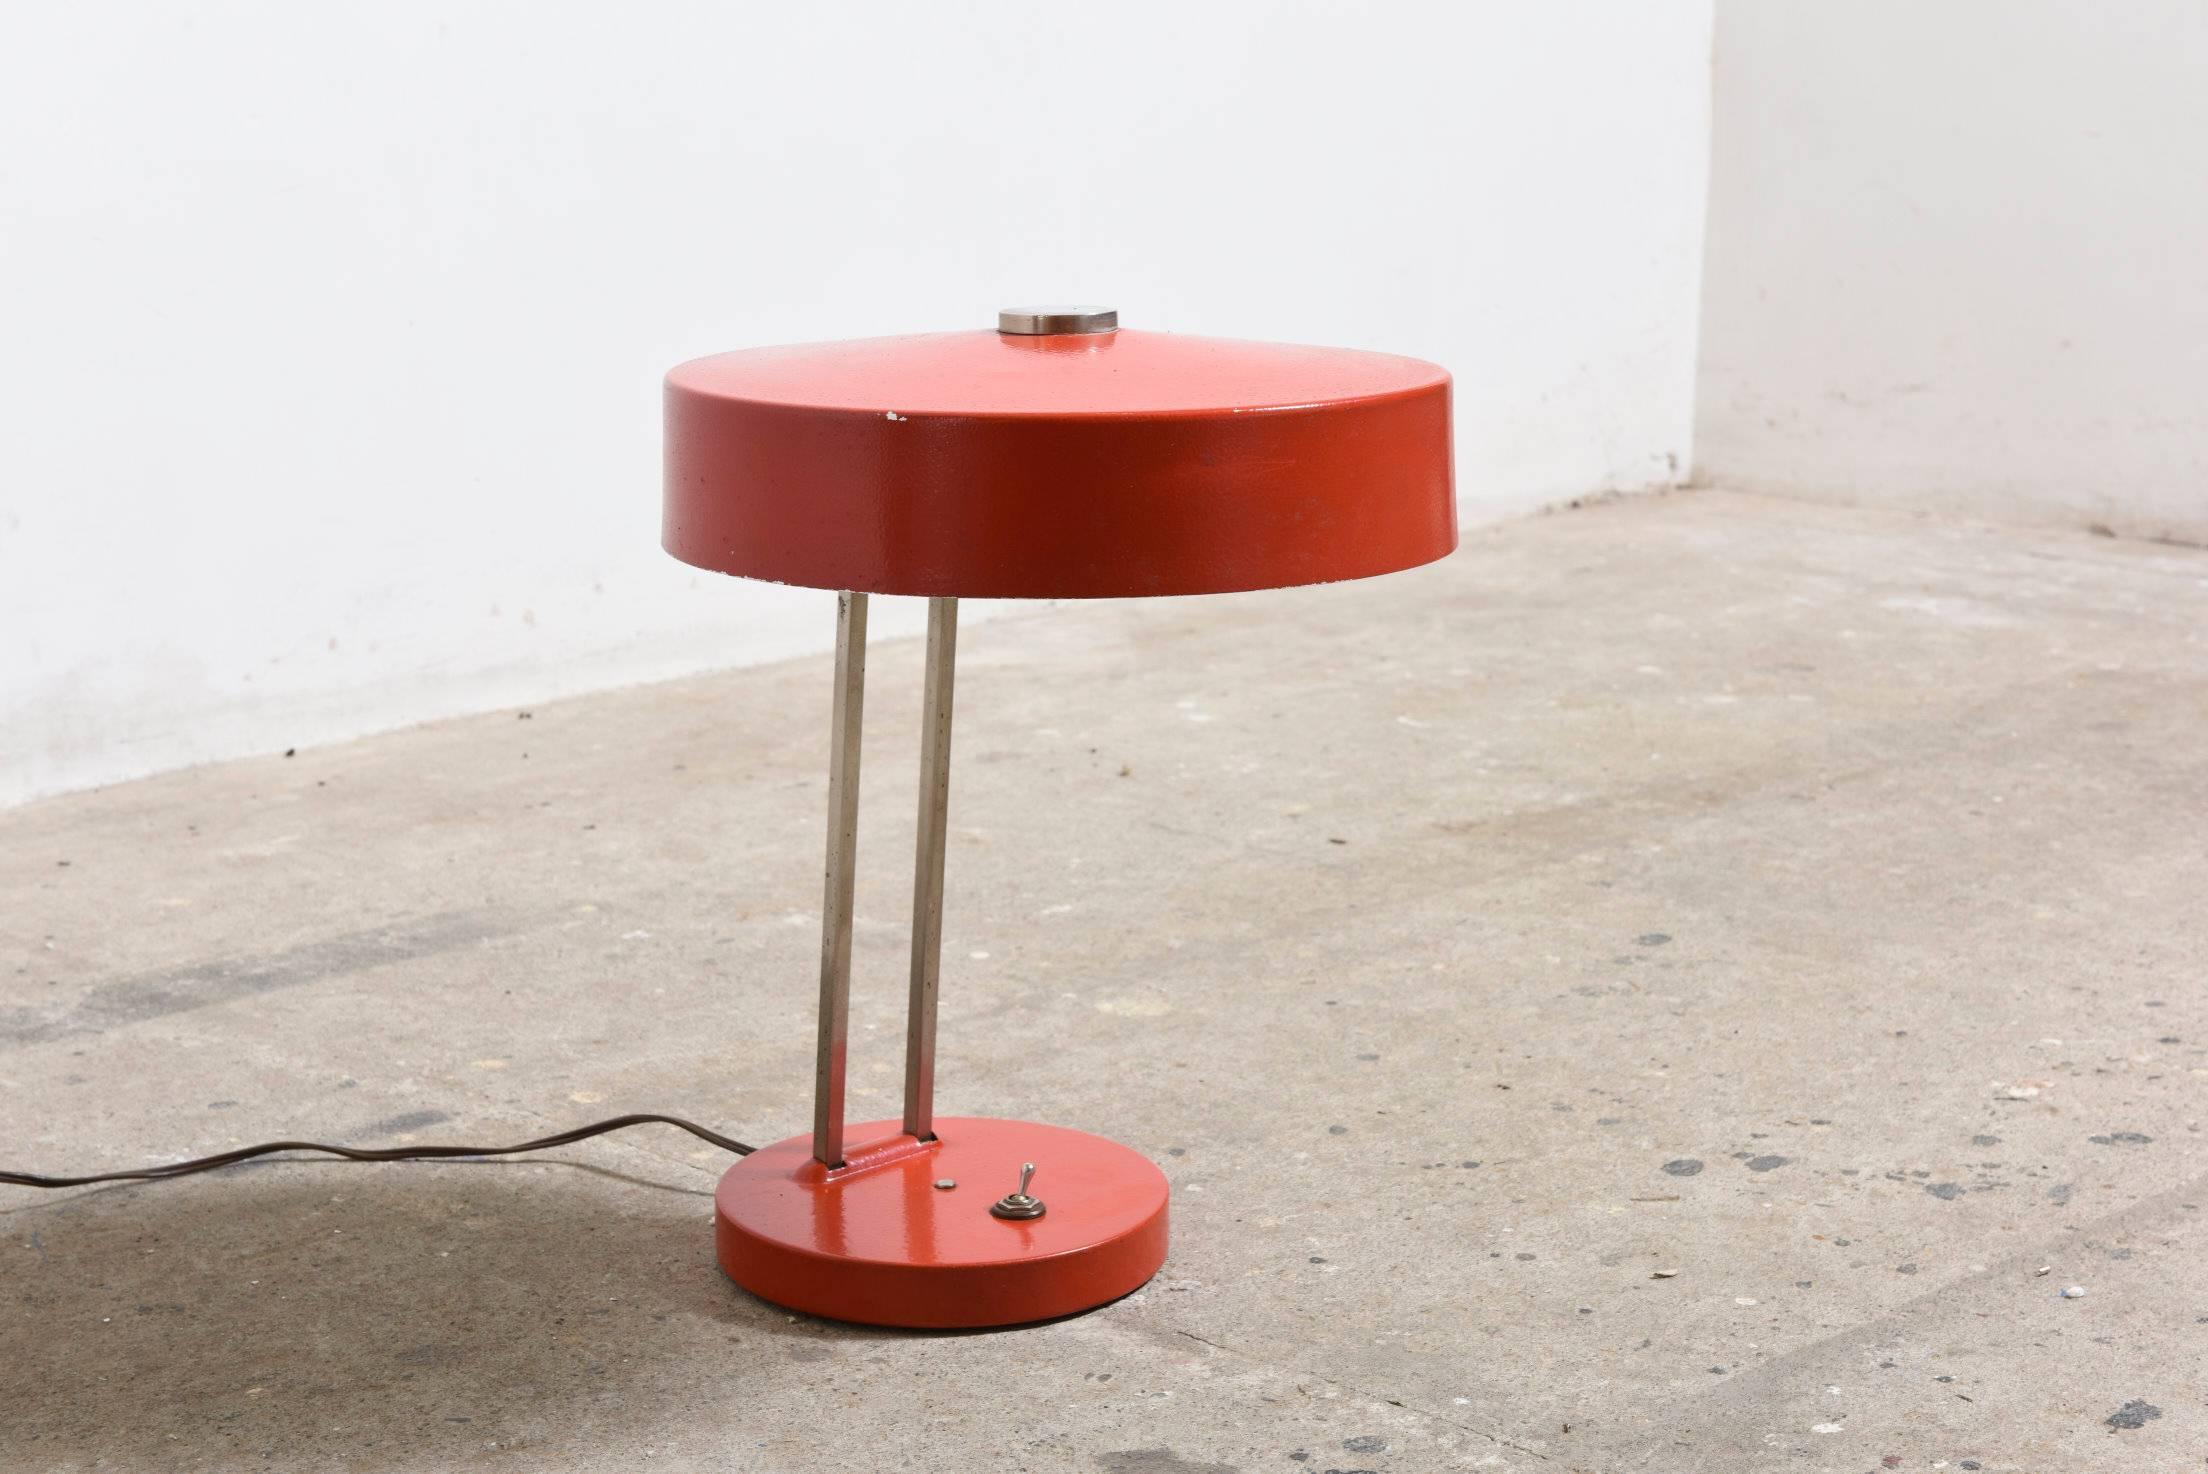 Adjustable desk lamp with an enameled emerald red shade connected by a curved chrome stem and red base by Bauhaus designer Christian Dell for Kaiser.